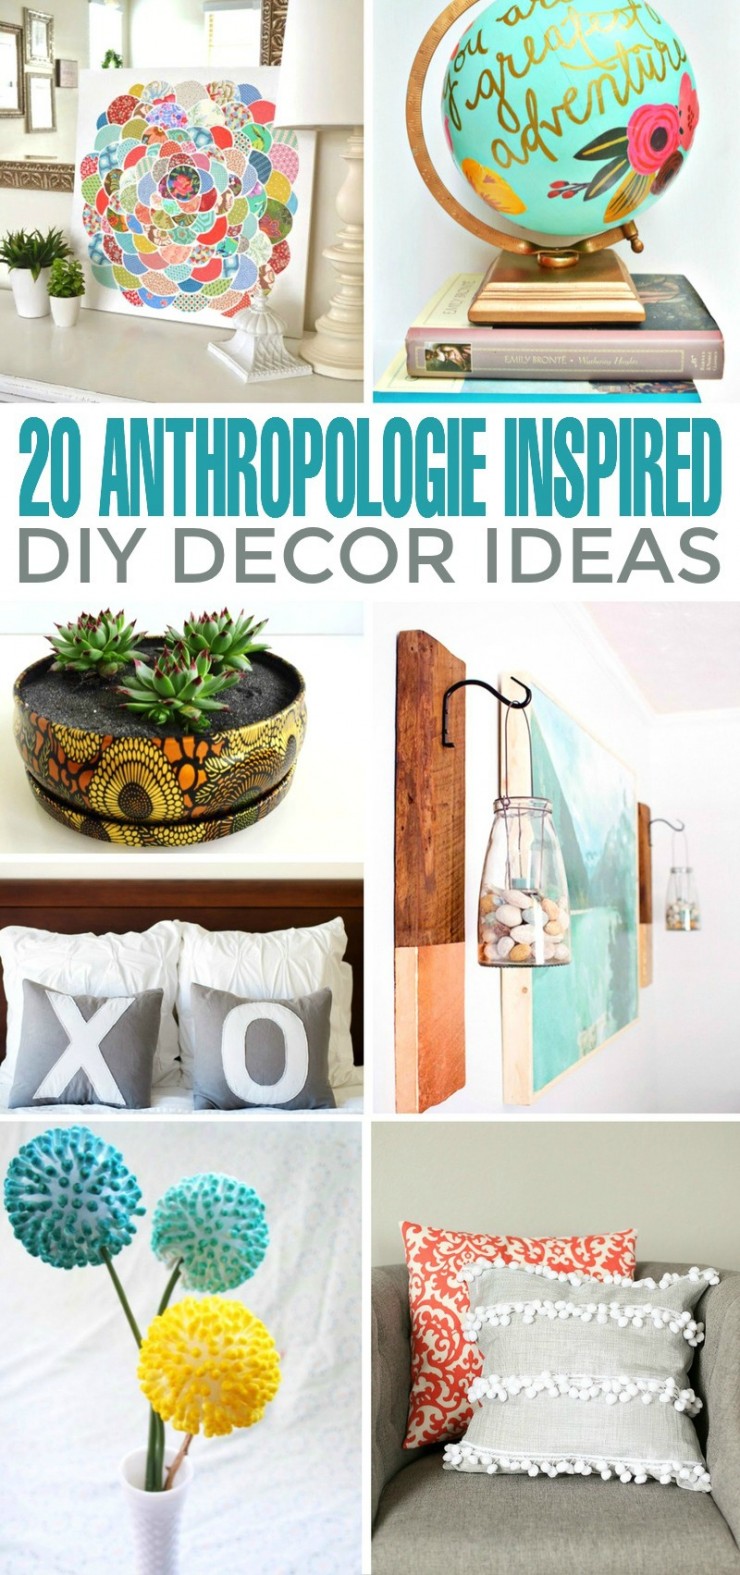 Whether you're in the market for new throw pillows or for a wreath to spice up your home décor, these 20 DIY Anthropologie inspired DIY Decor Ideas will give your space the makeover you've been looking for. 